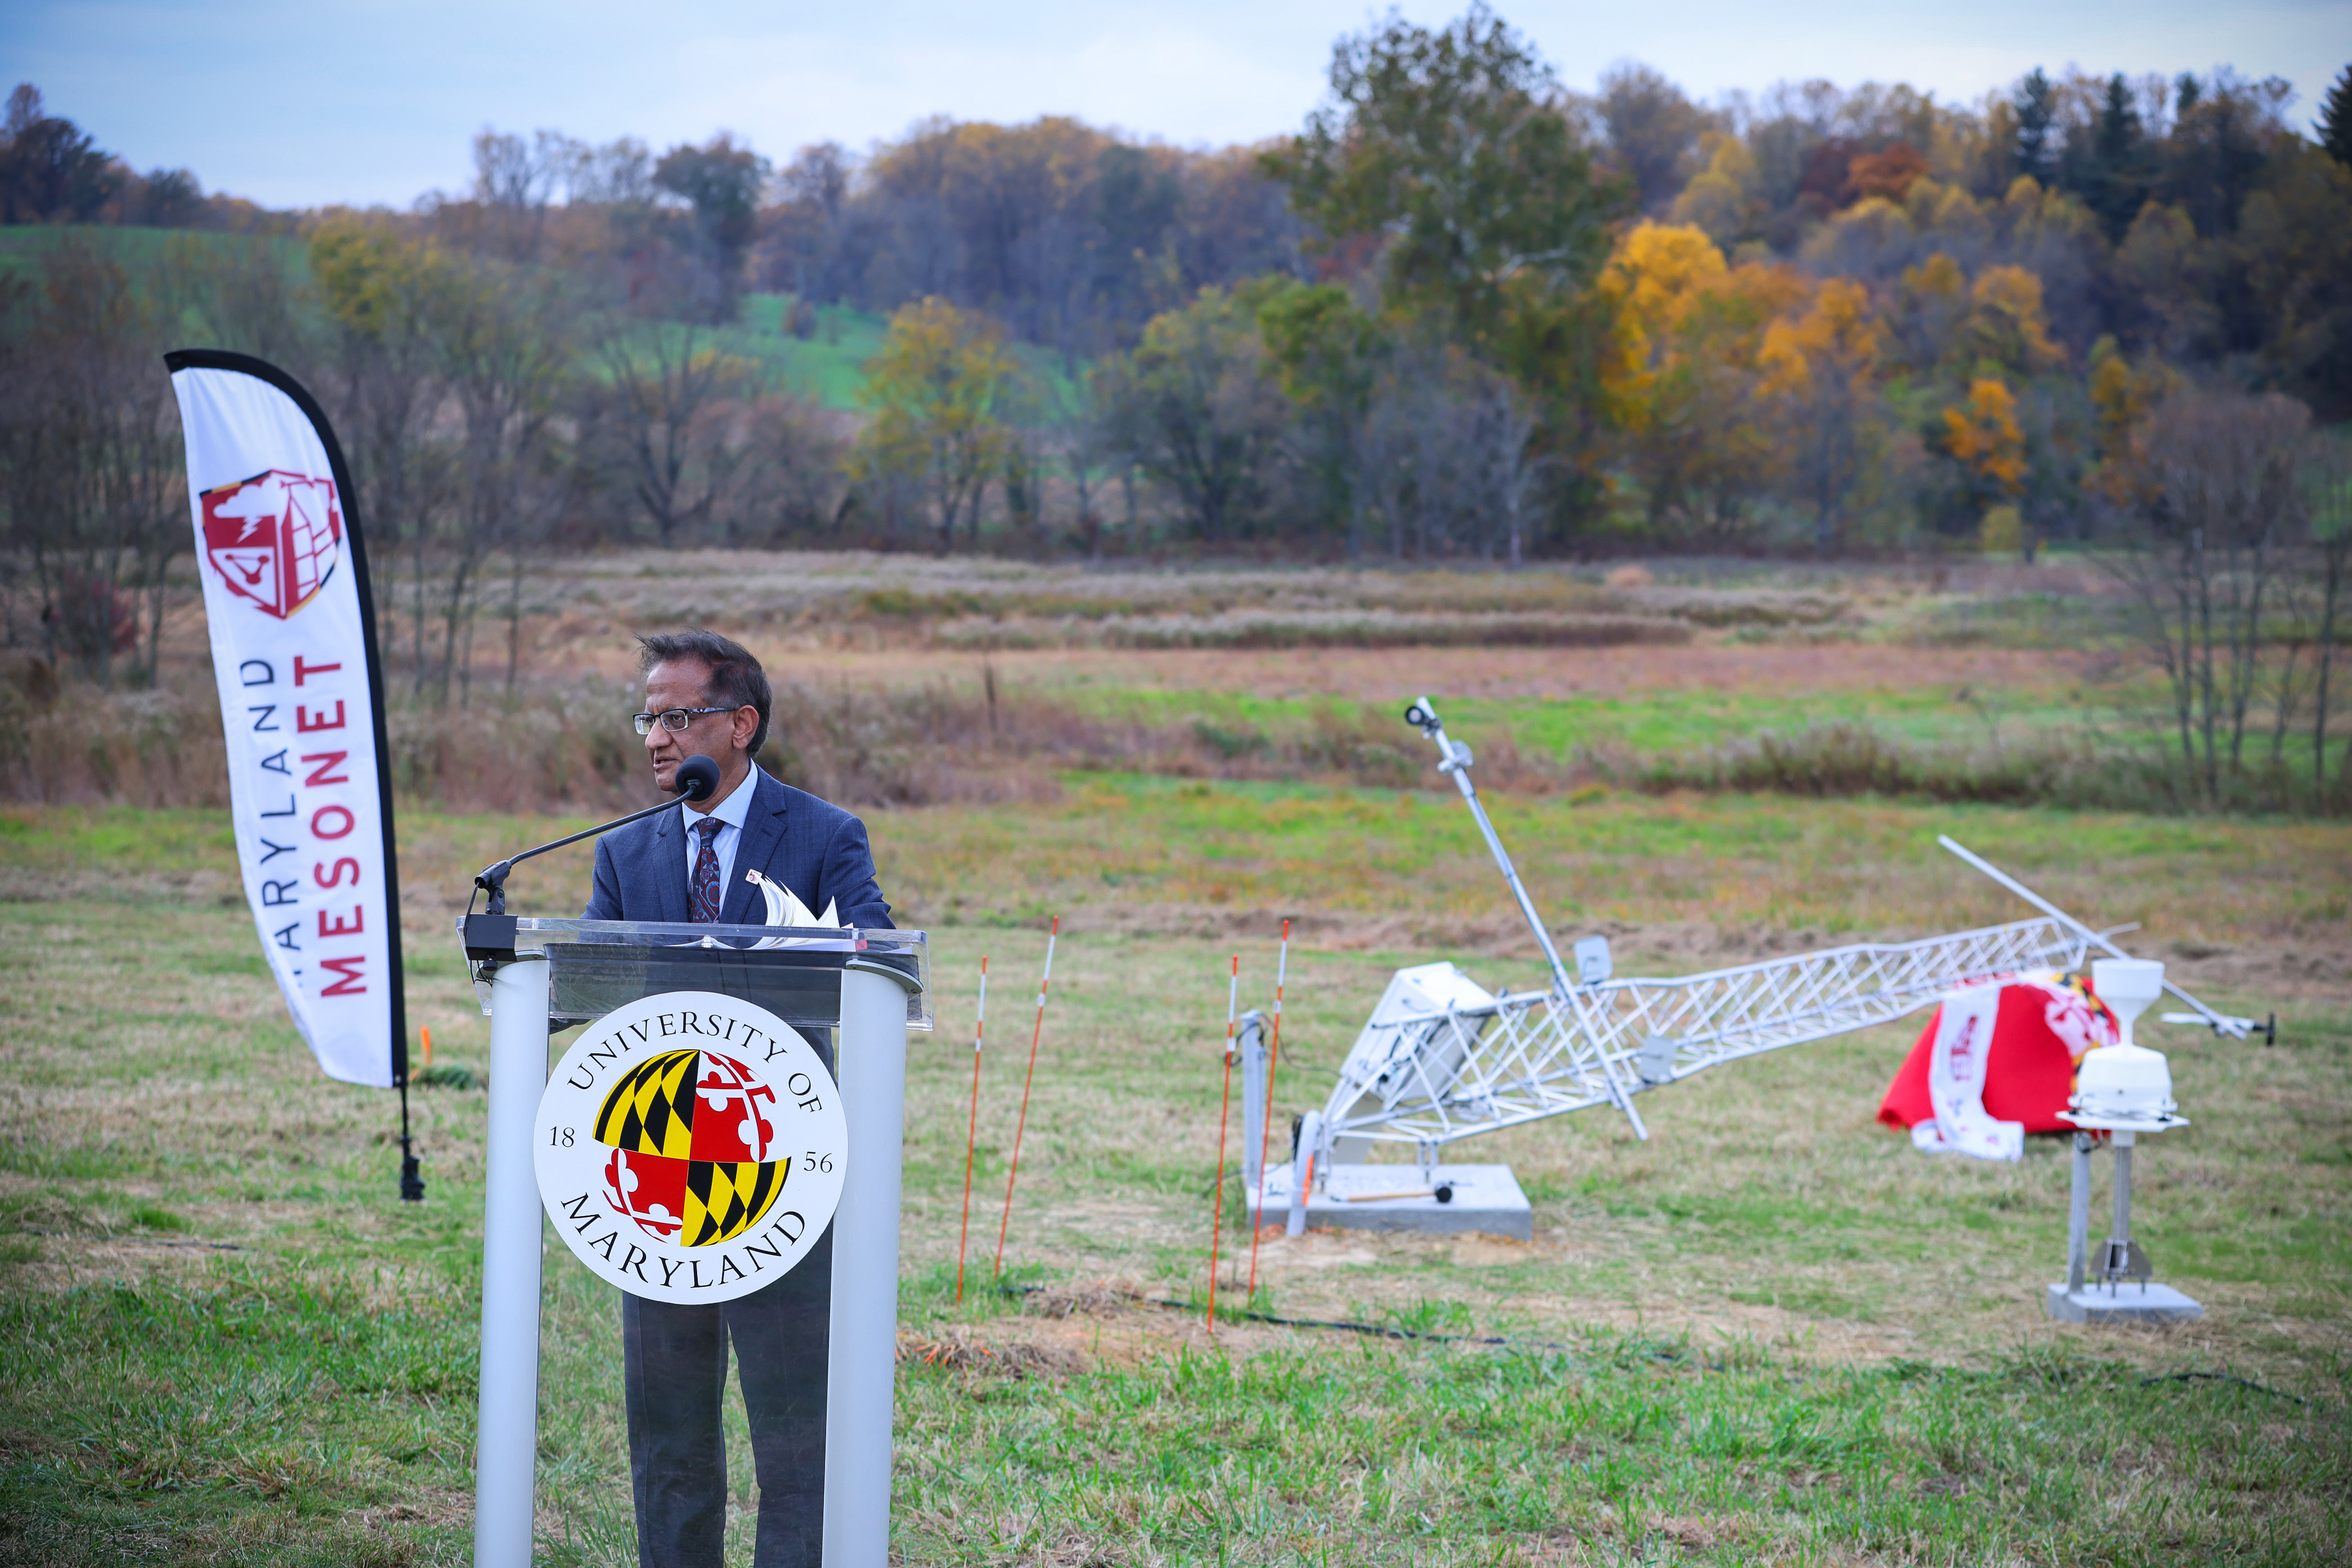 Atmospheric and Oceanic Science Department Chair Sumant Nigam stands at a podium during the inauguration event for the first Maryland Mesonet tower.